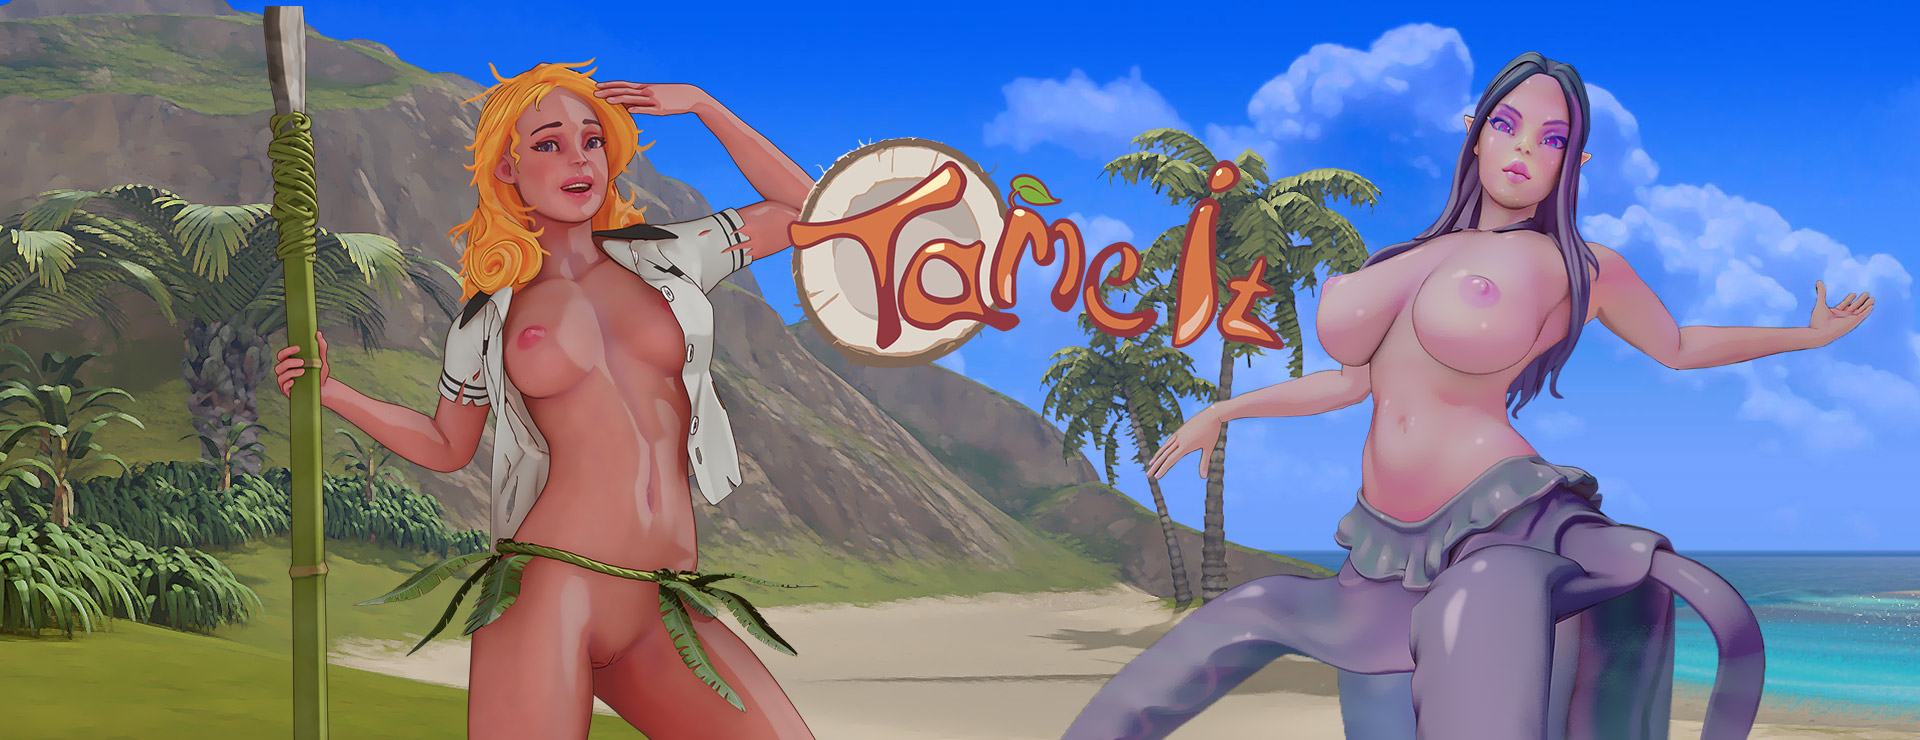 Tame It! - Action Adventure Game